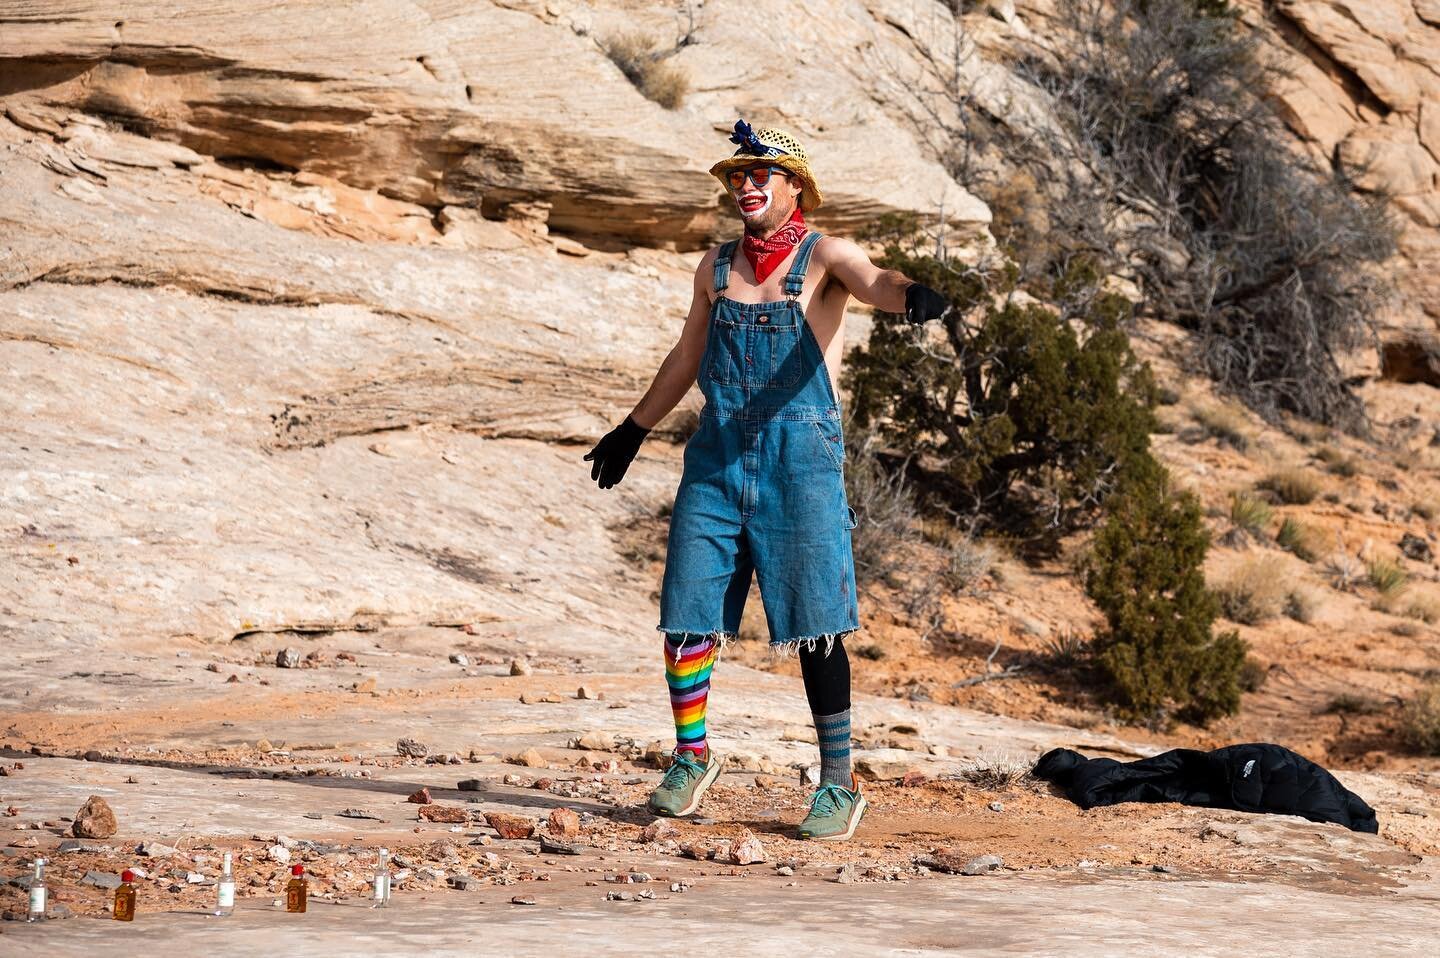 What do you get when you mix a partially clothed clown dancing in the middle of nowhere with whiskey? 

TransRockies-style running

We&rsquo;re here for a long time, a good time, and a weird time.